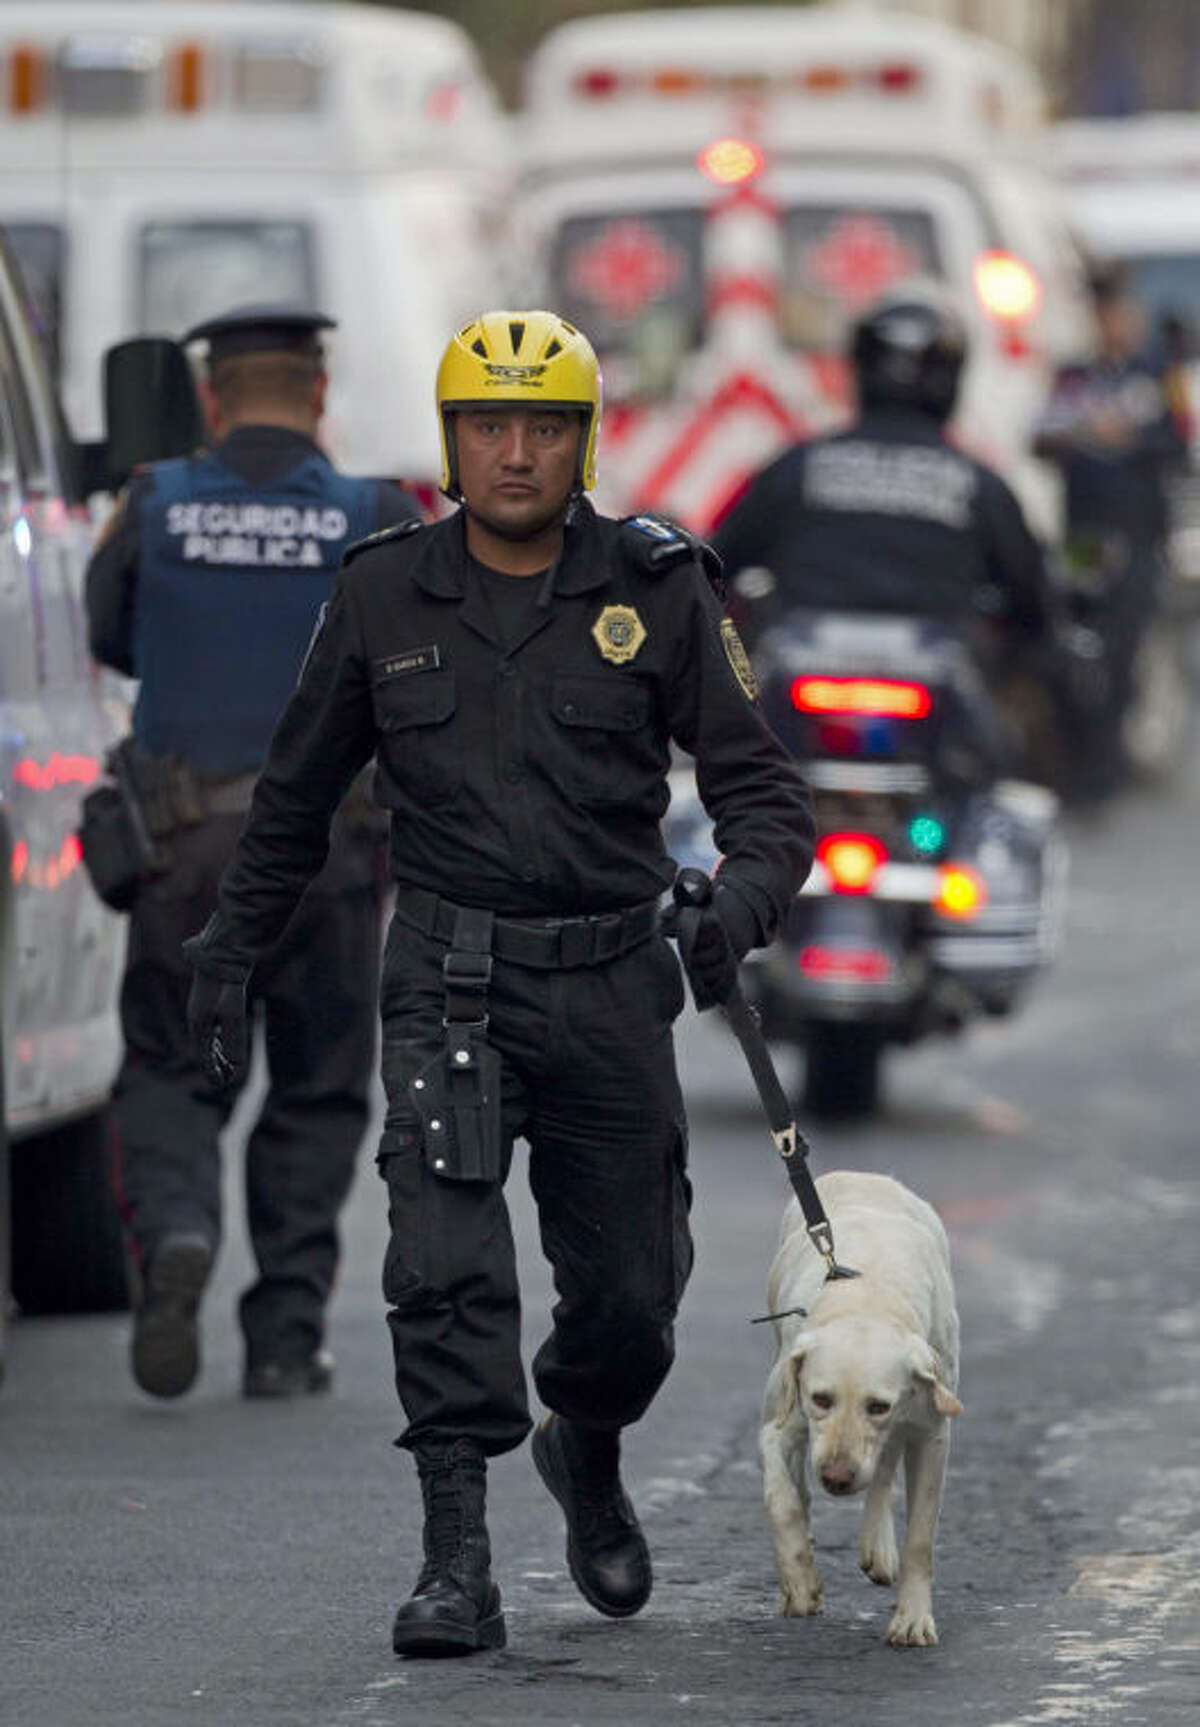 An emergency responder walks with a search dog as emergency workers and firefighters search for trapped survivors at the site on an explosion in a building at Mexico's state-owned oil company PEMEX complex, in Mexico City, Thursday Jan. 31, 2013. The explosion killed more than 10 people and injured some 80 as it heavily damaged three floors of the building. According to civil protection and local media some people remained trapped in the debris from the explosion, which occurred in the basement of an administrative building next to the iconic, 52-story tower of Petroleos Mexicanos, or PEMEX.(AP Photo/Eduardo Verdugo)